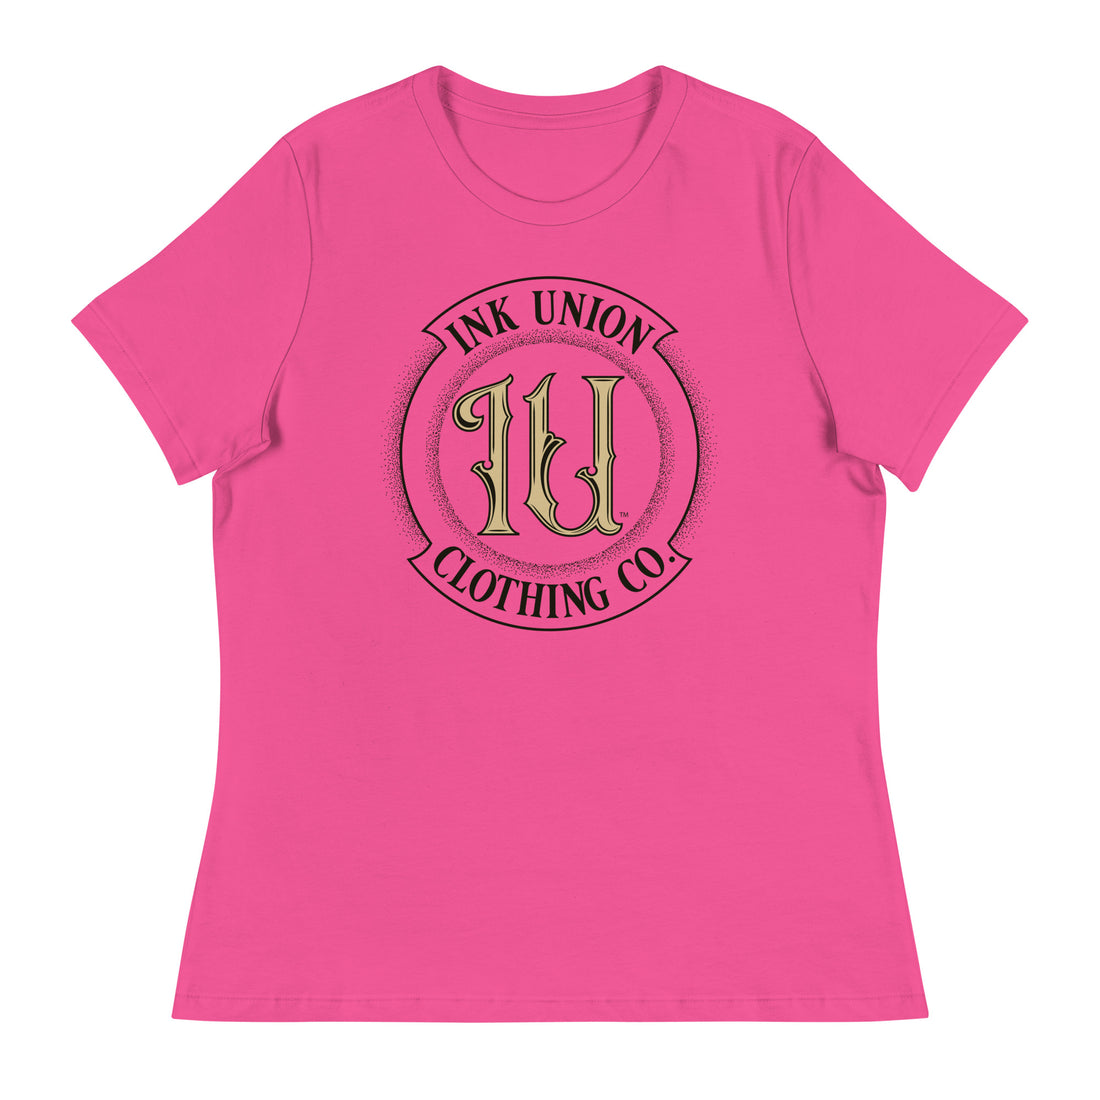 A pink t-shirt with the Ink Union Clothing Co Badge logo in black and gold centered on the front of the shirt.